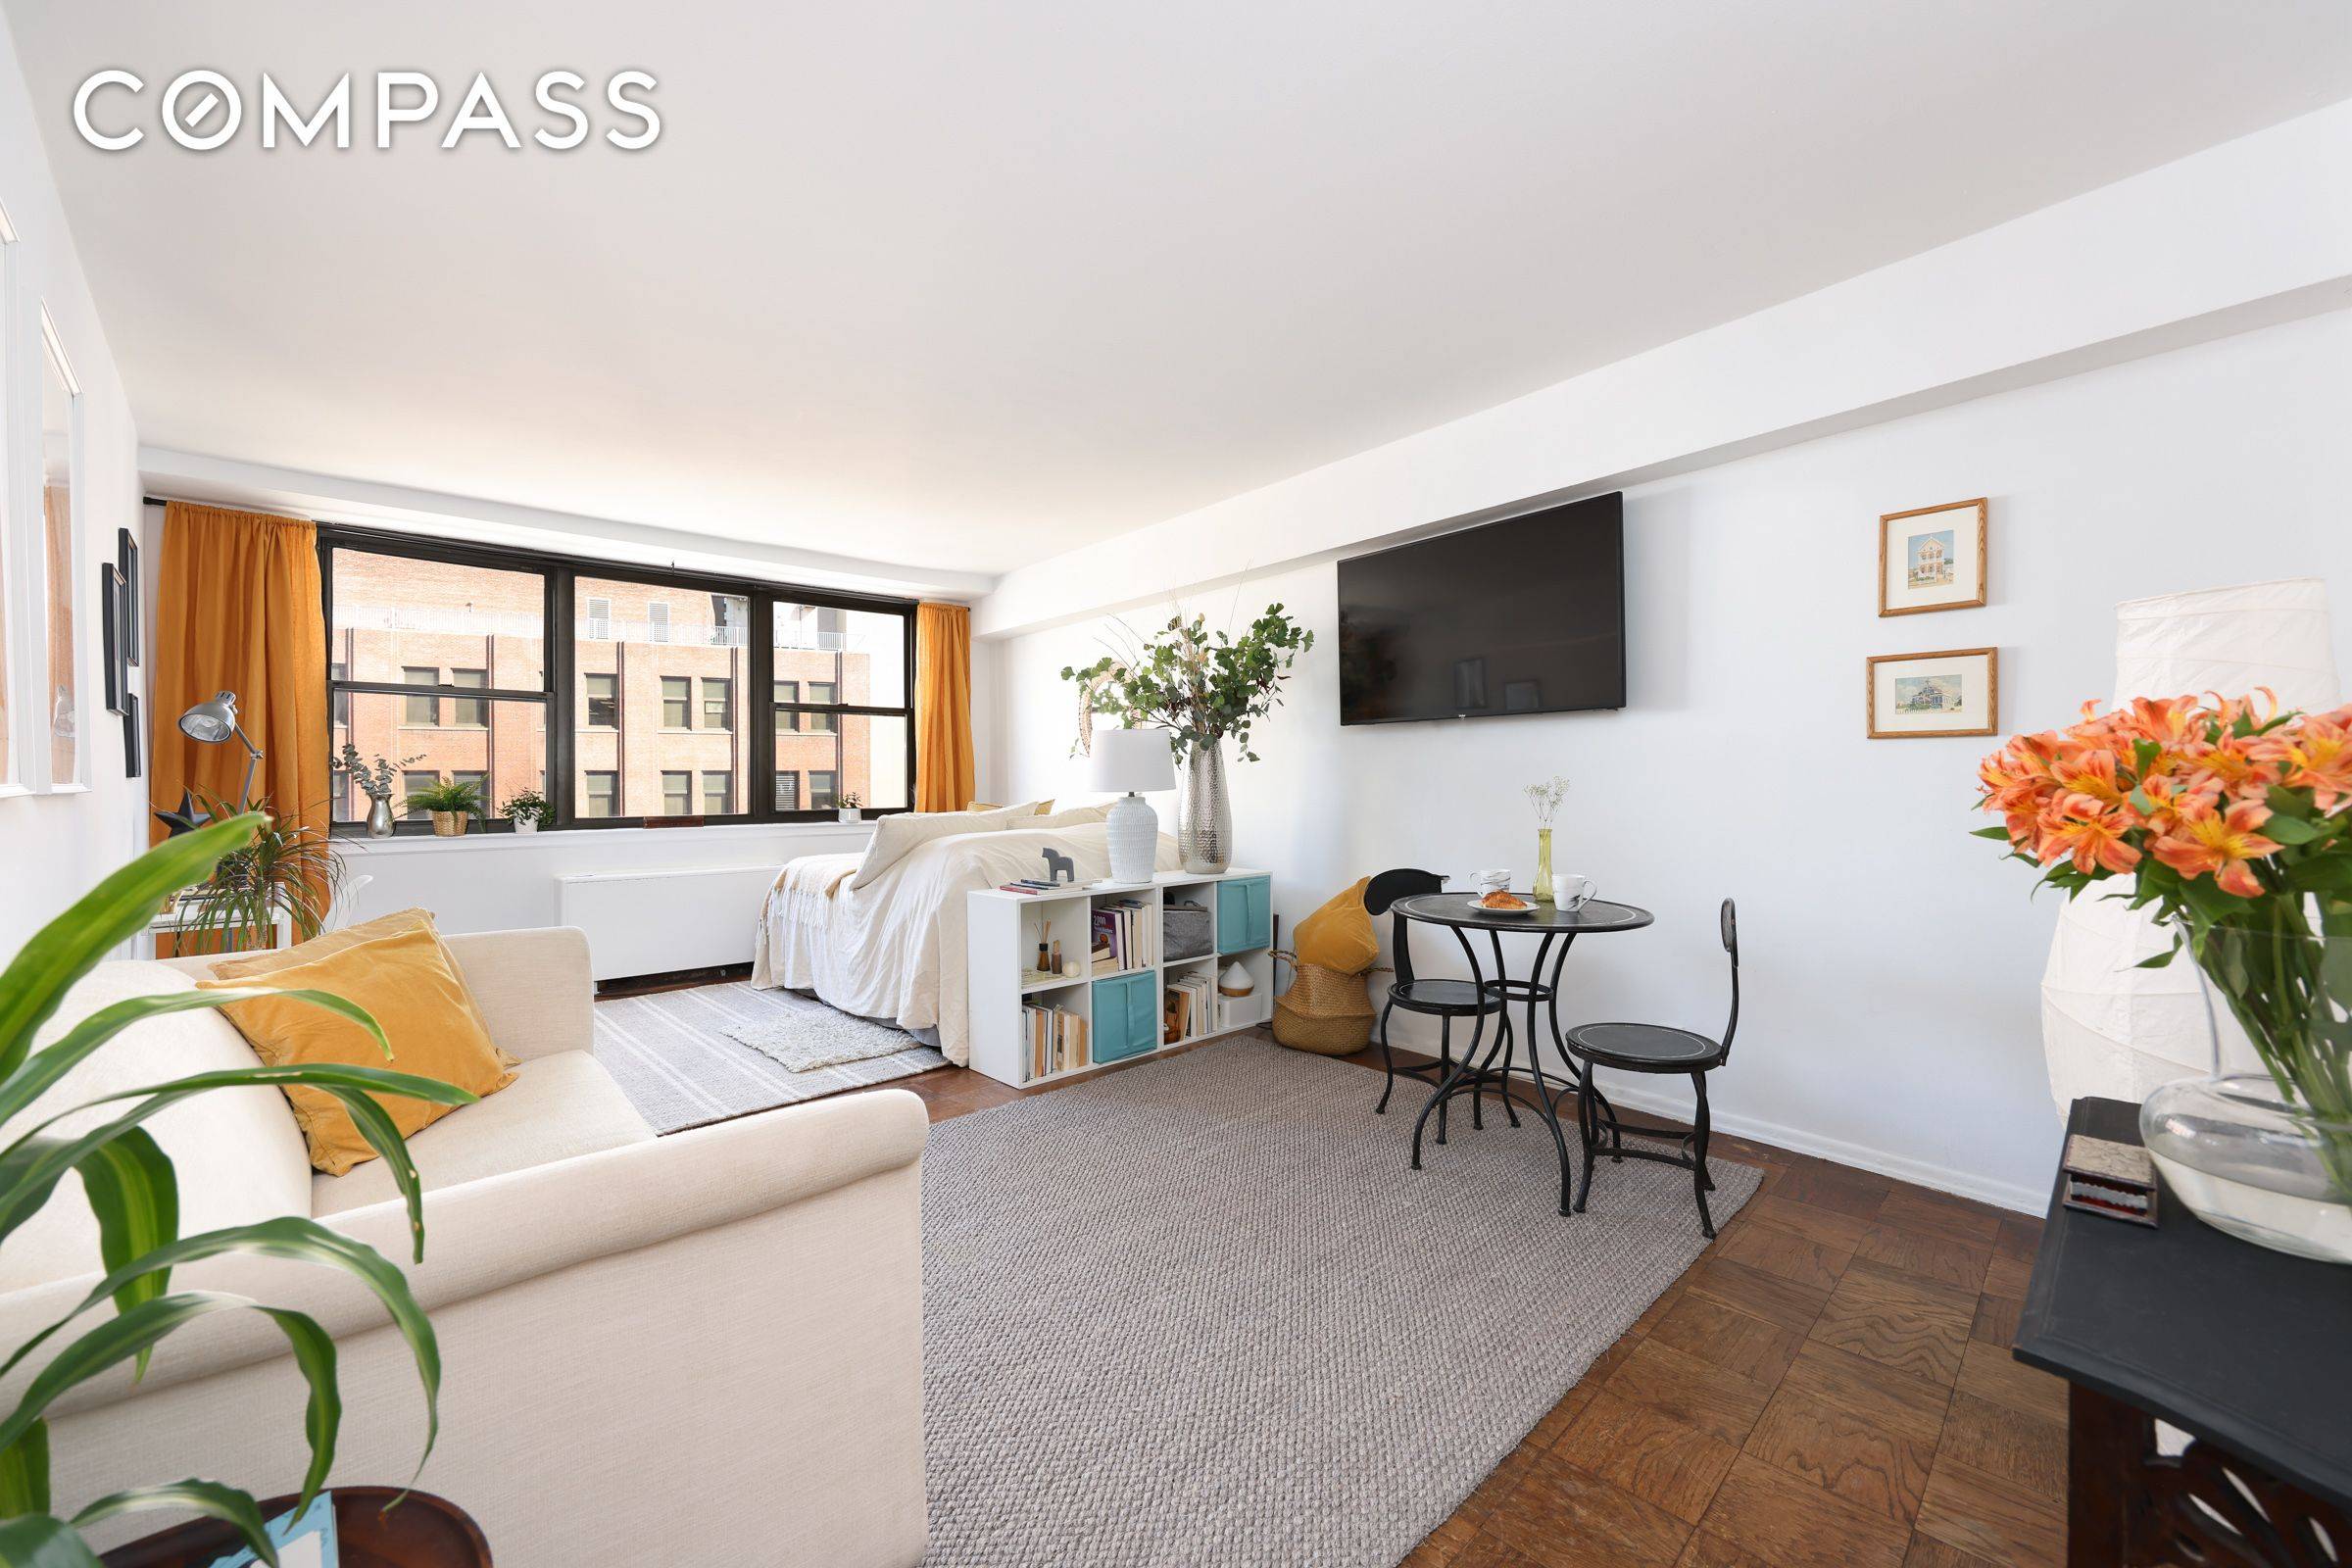 Enjoy open city views, featuring the iconic Chrysler Building, from this high floor, studio apartment.